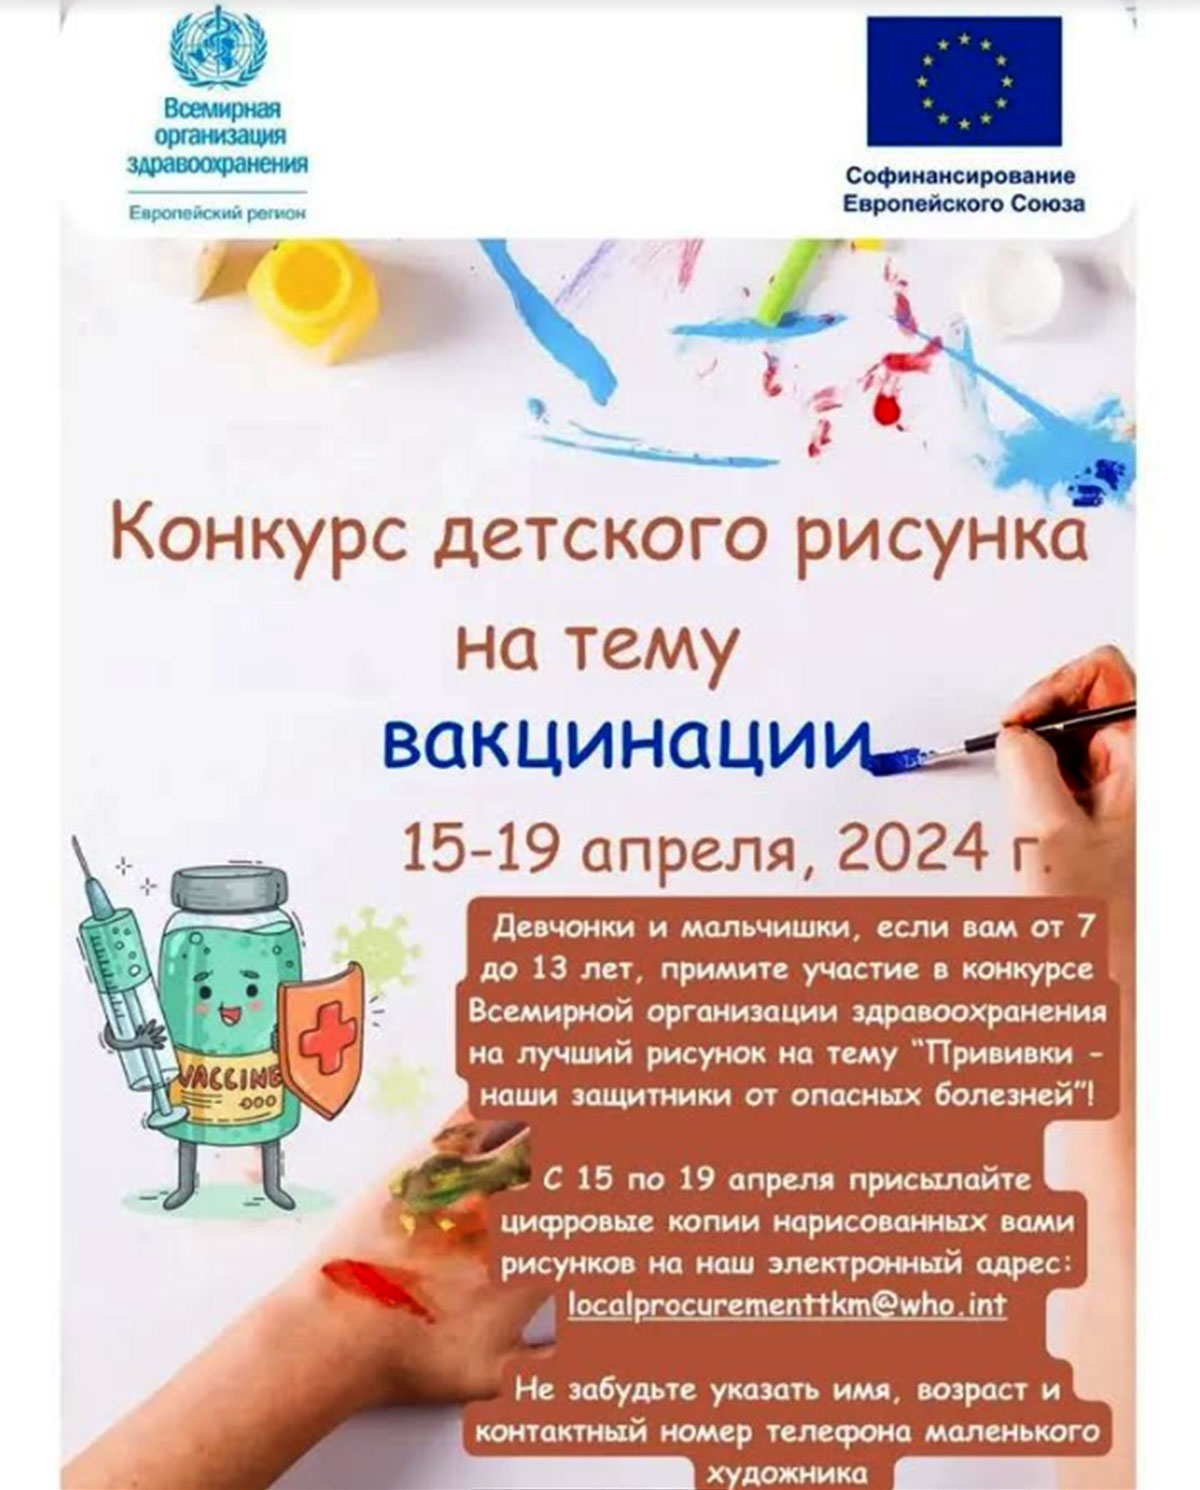 A children's drawing competition has been announced in Turkmenistan